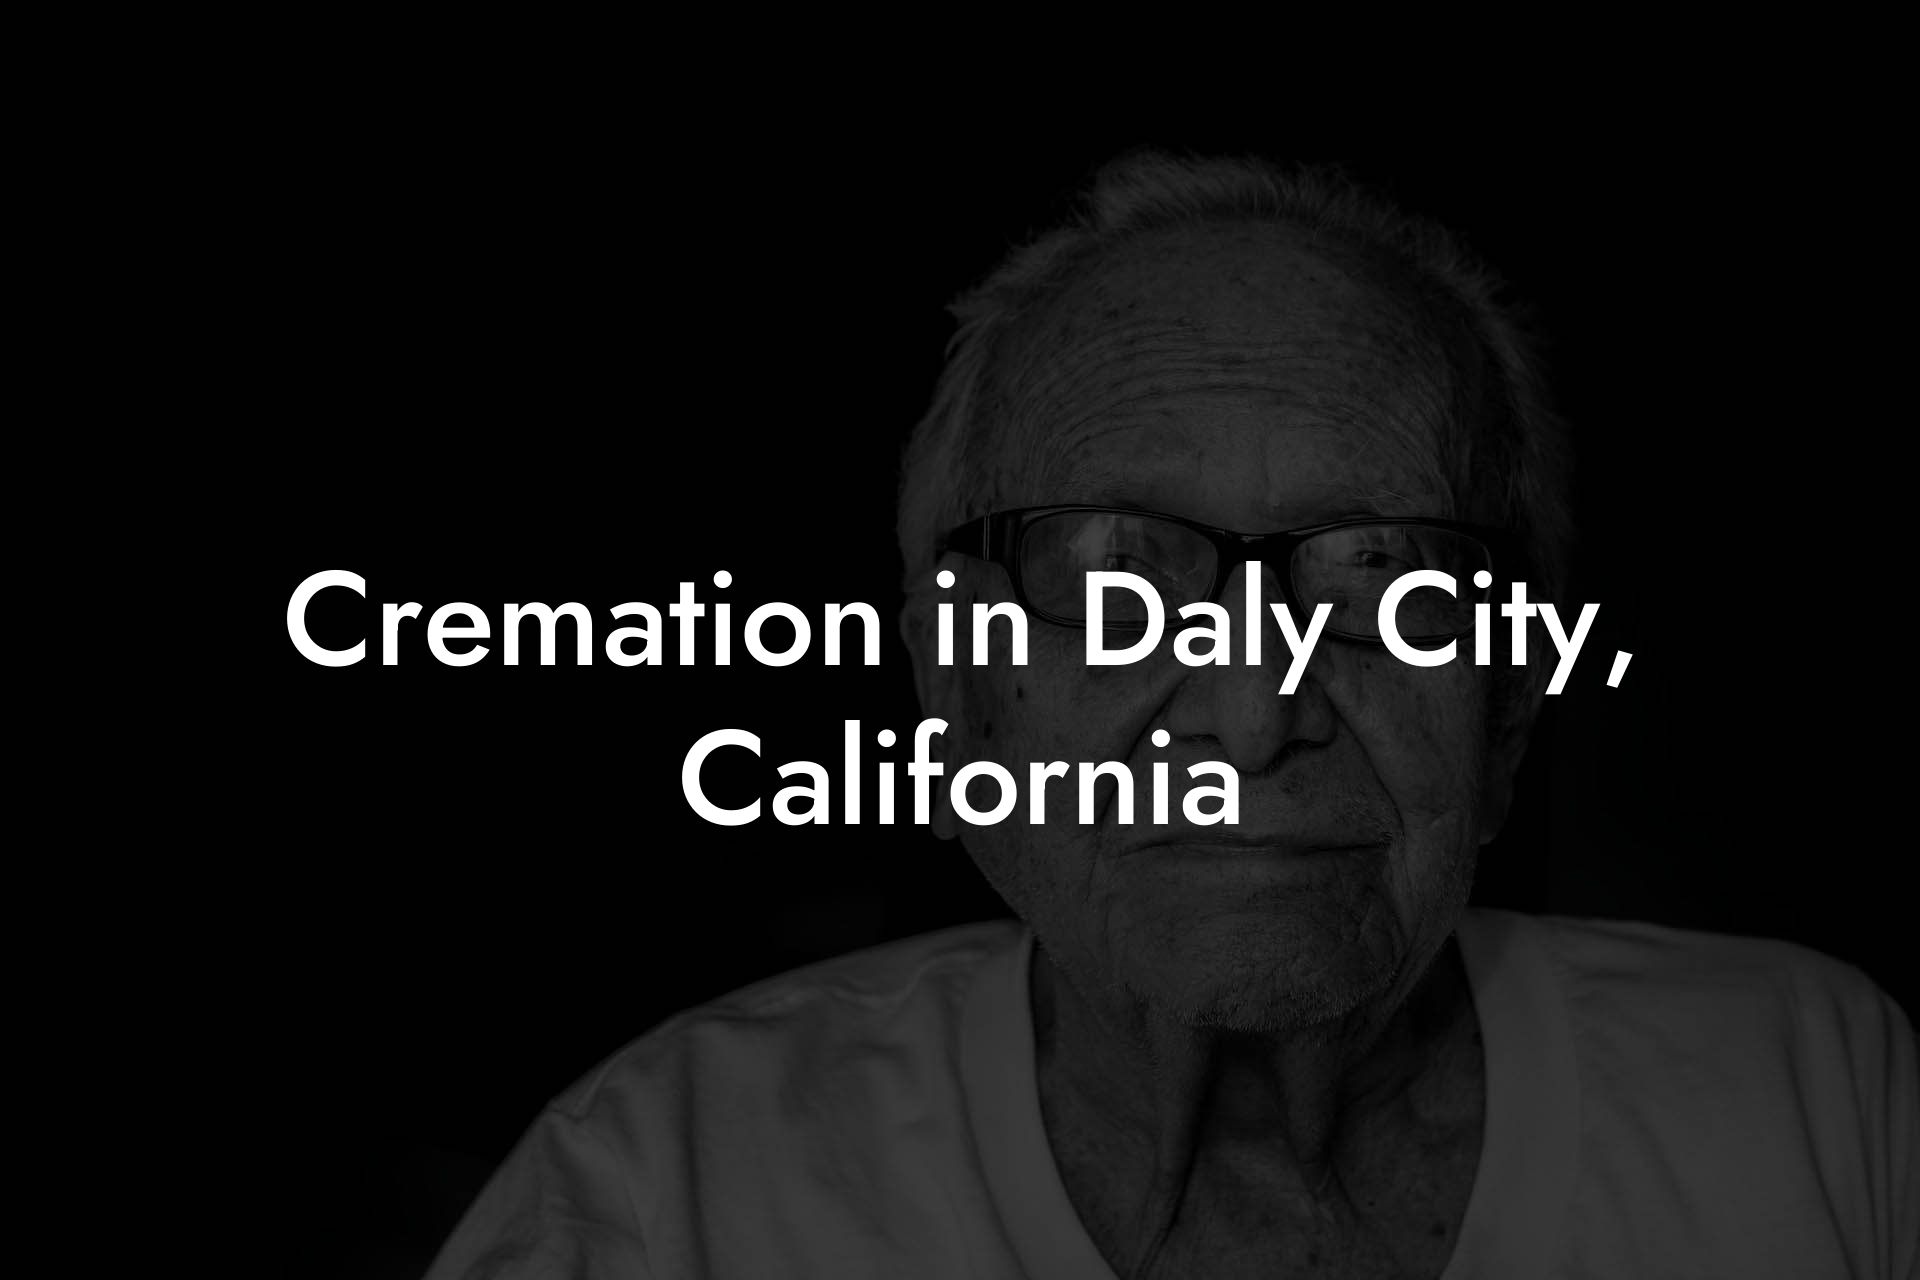 Cremation in Daly City, California